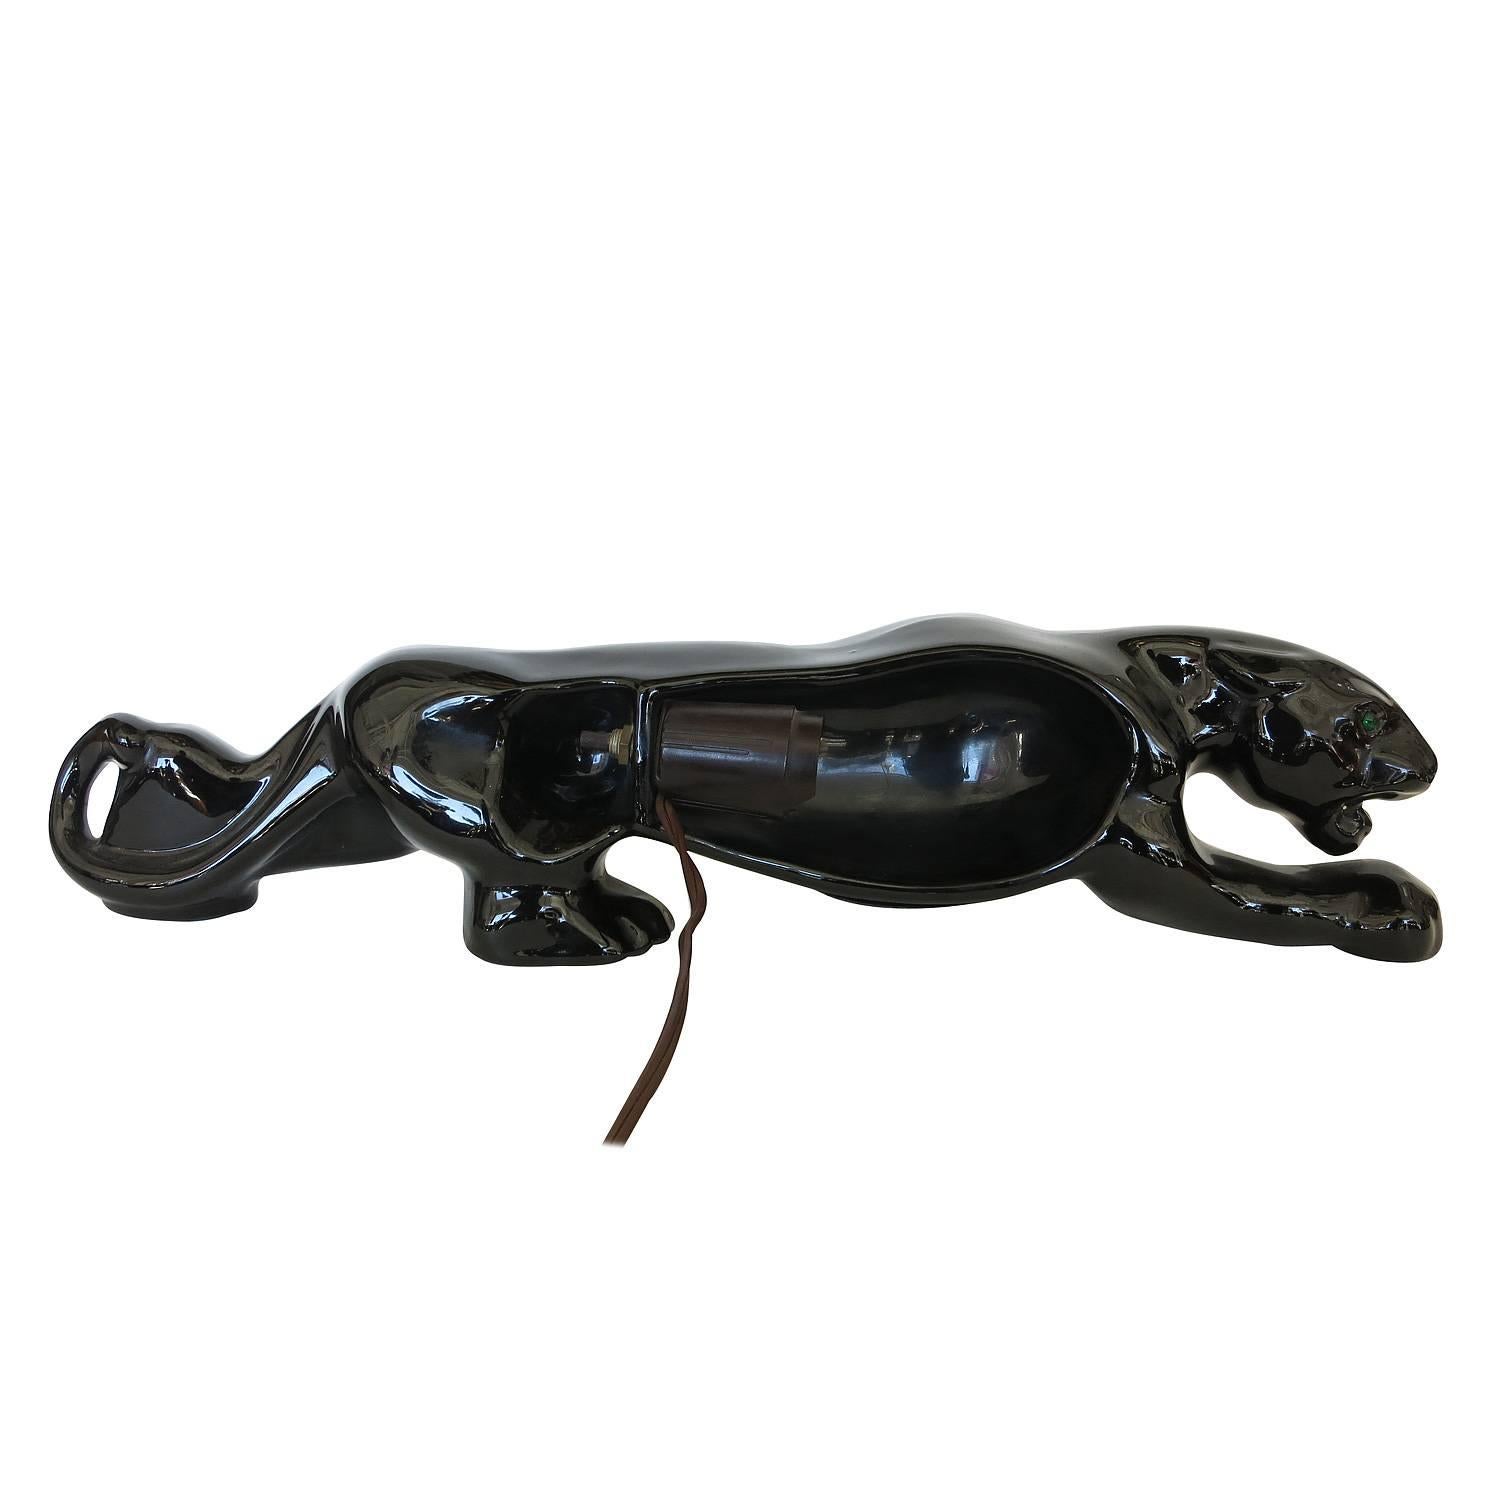 Dear Customer, I have marked many of my items for the 1stdibs Saturday Sale, take a look and save from 20% to 50% now. Take a look at all of these items; https://goo.gl/hNLz4x

Mid-Century black panther art pottery lamp featuring a high glazed black